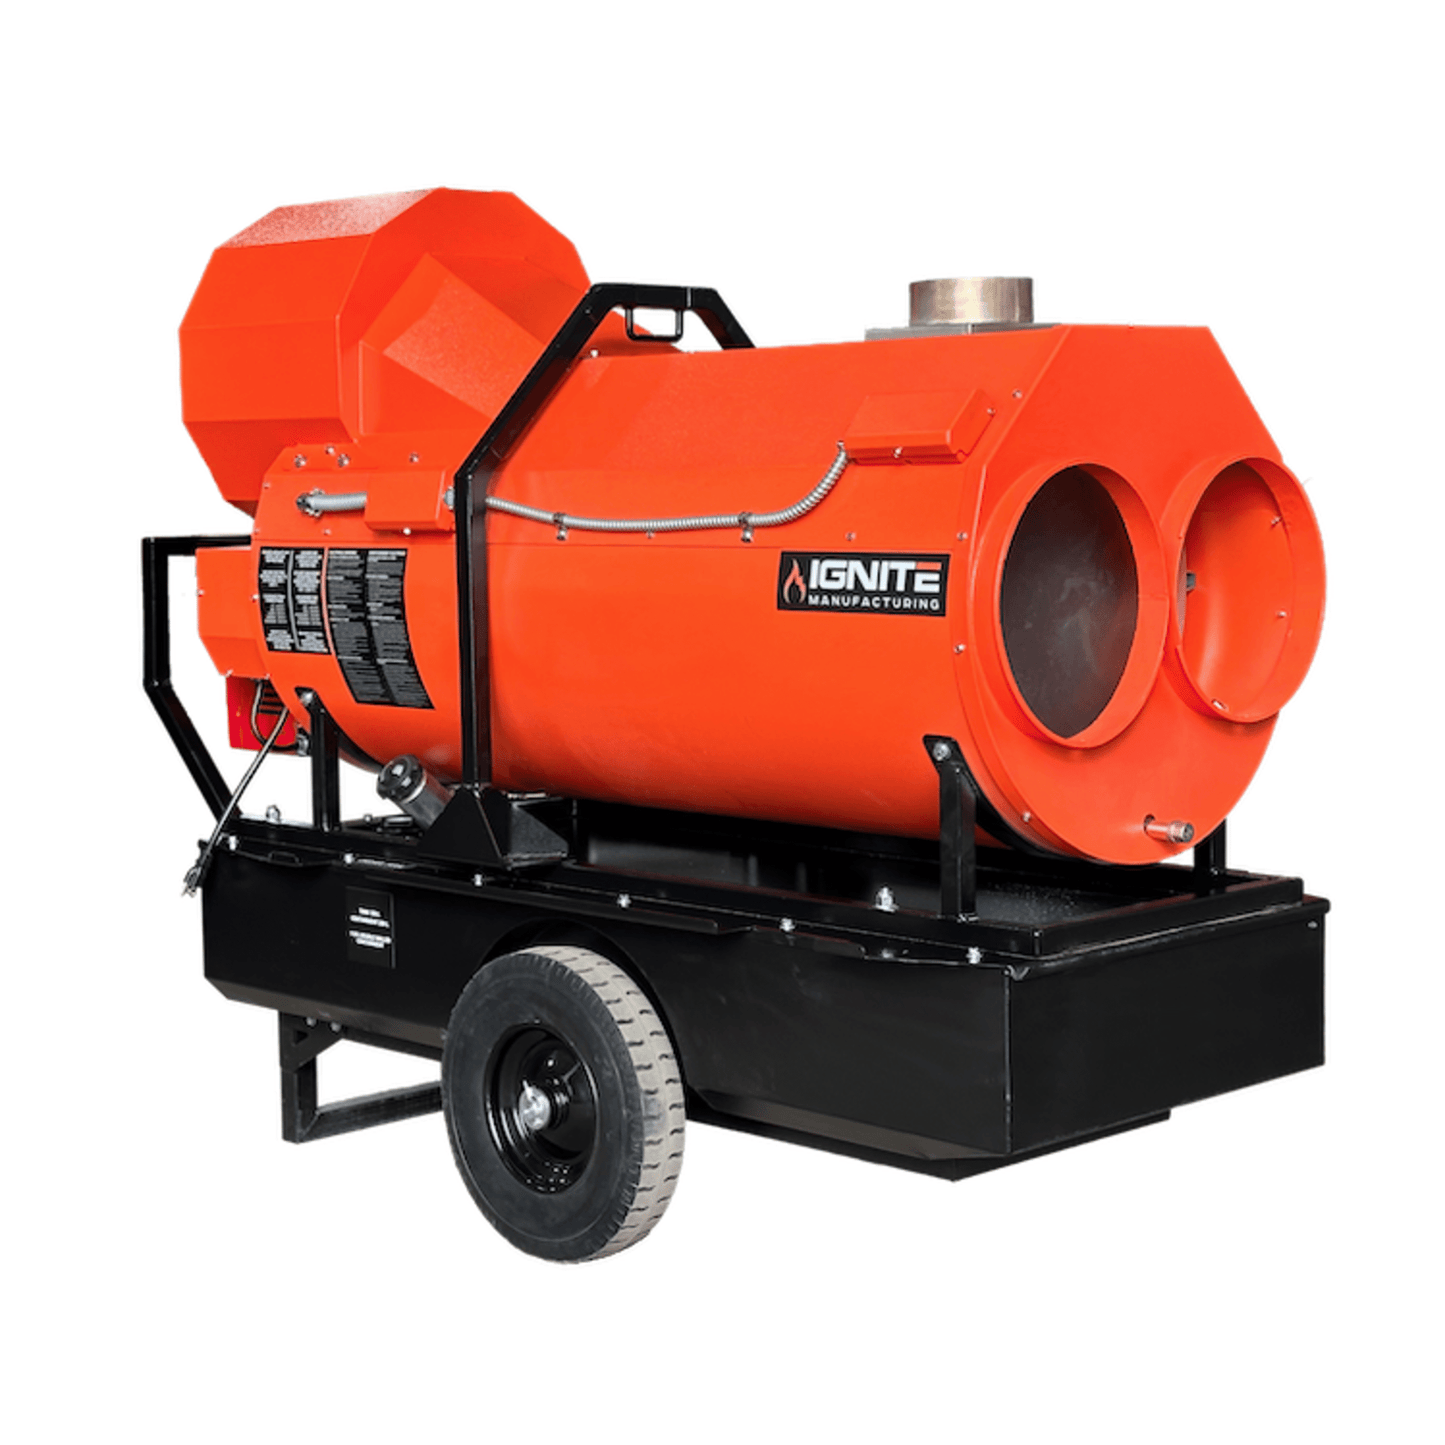 Ignite HO-400R, Oil fueled Construction heater with a recirculating hood